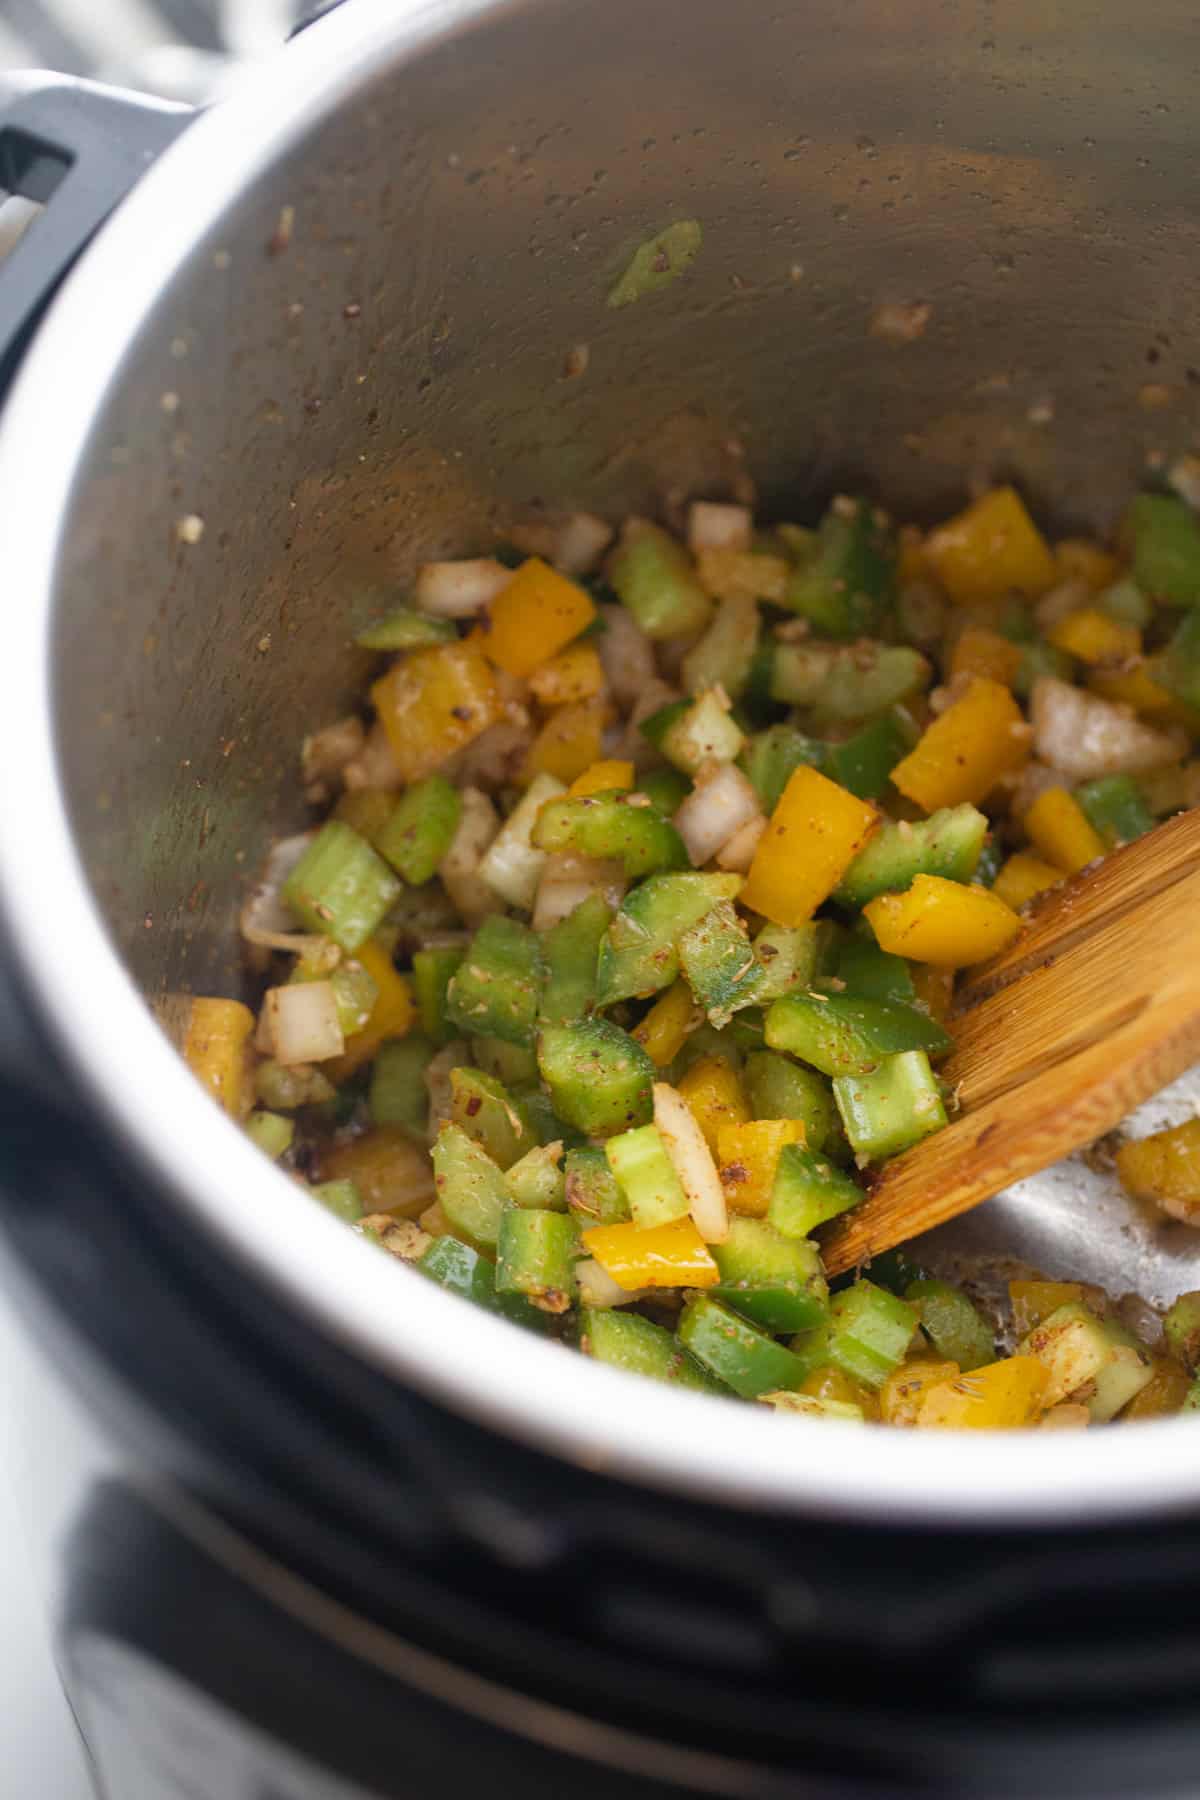 Green and yellow bell peppers being sauteed along with onion in an Instant Pot preparing jambalaya.